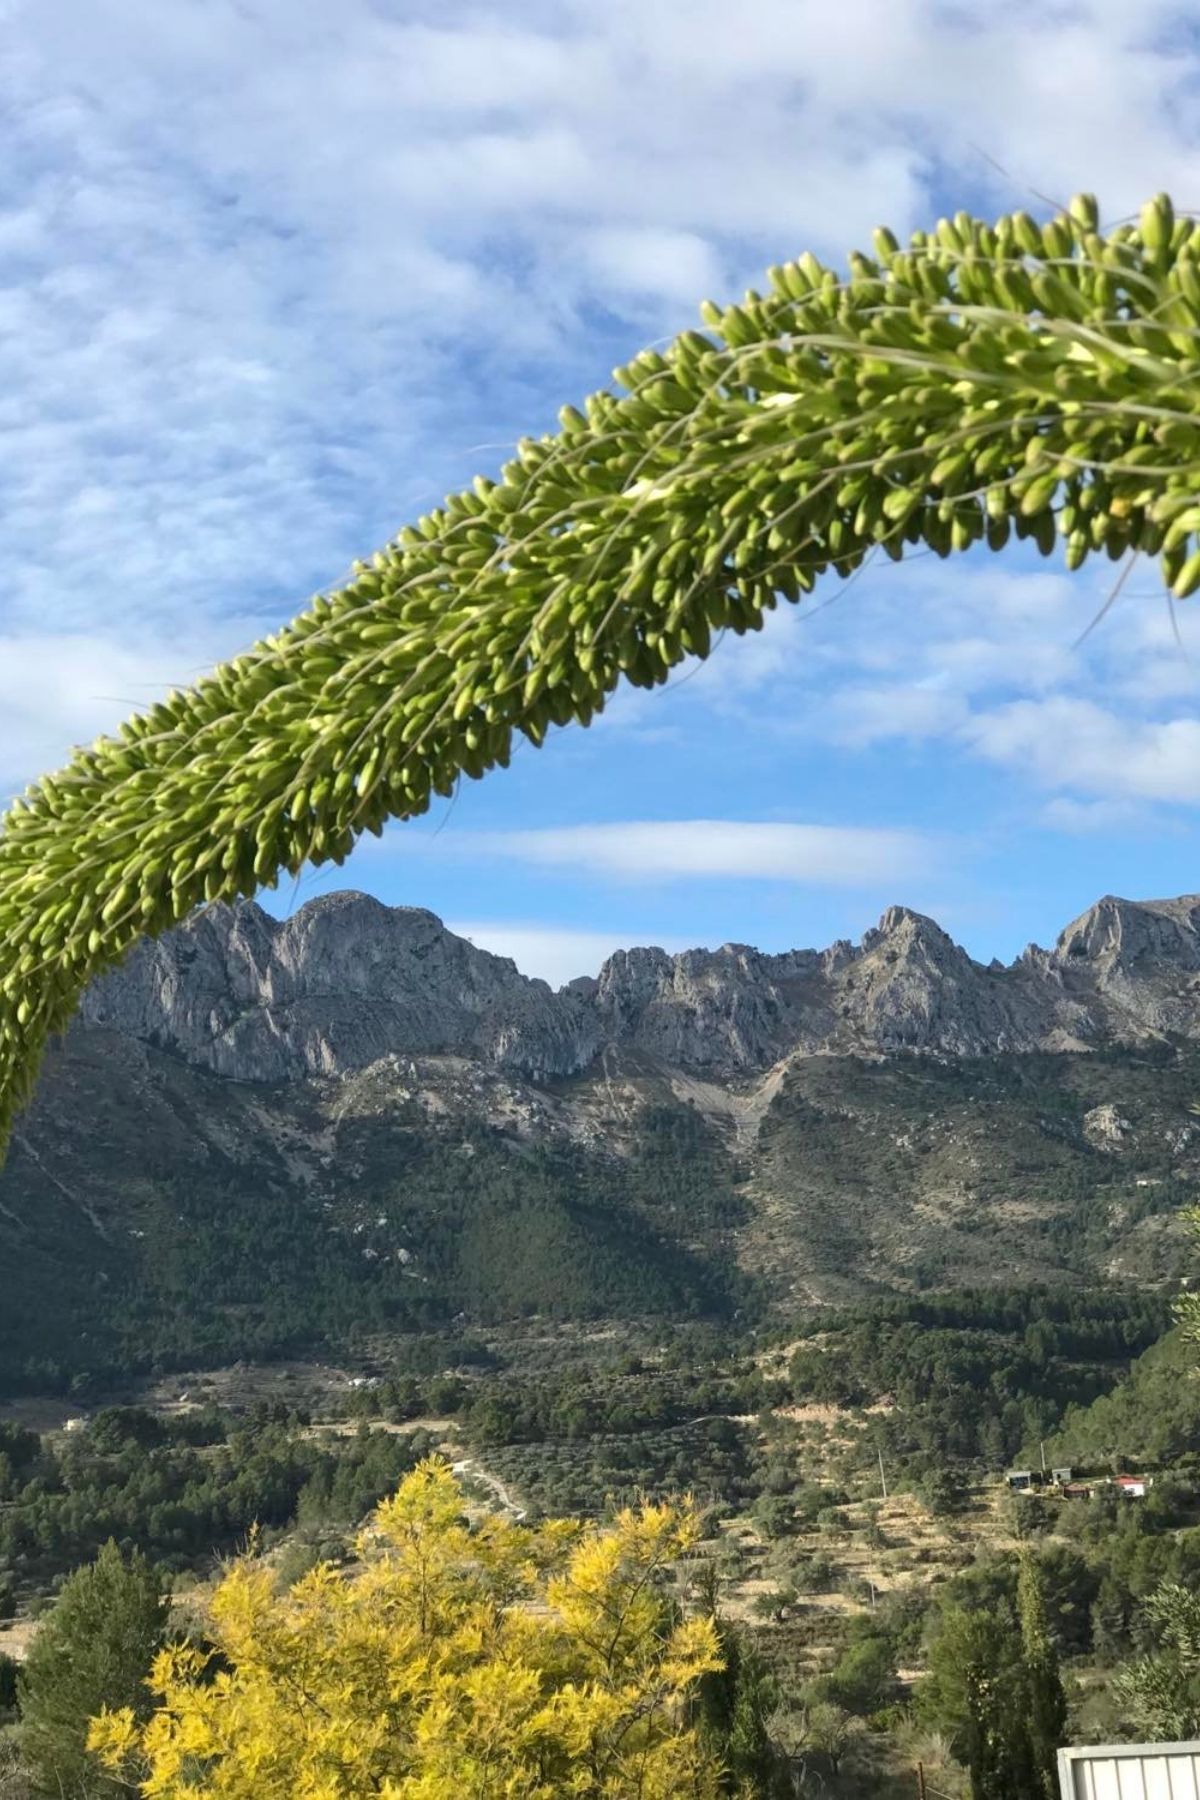 Flowering Foxtail Agave or Agave Attenuata in Calpe, Spain